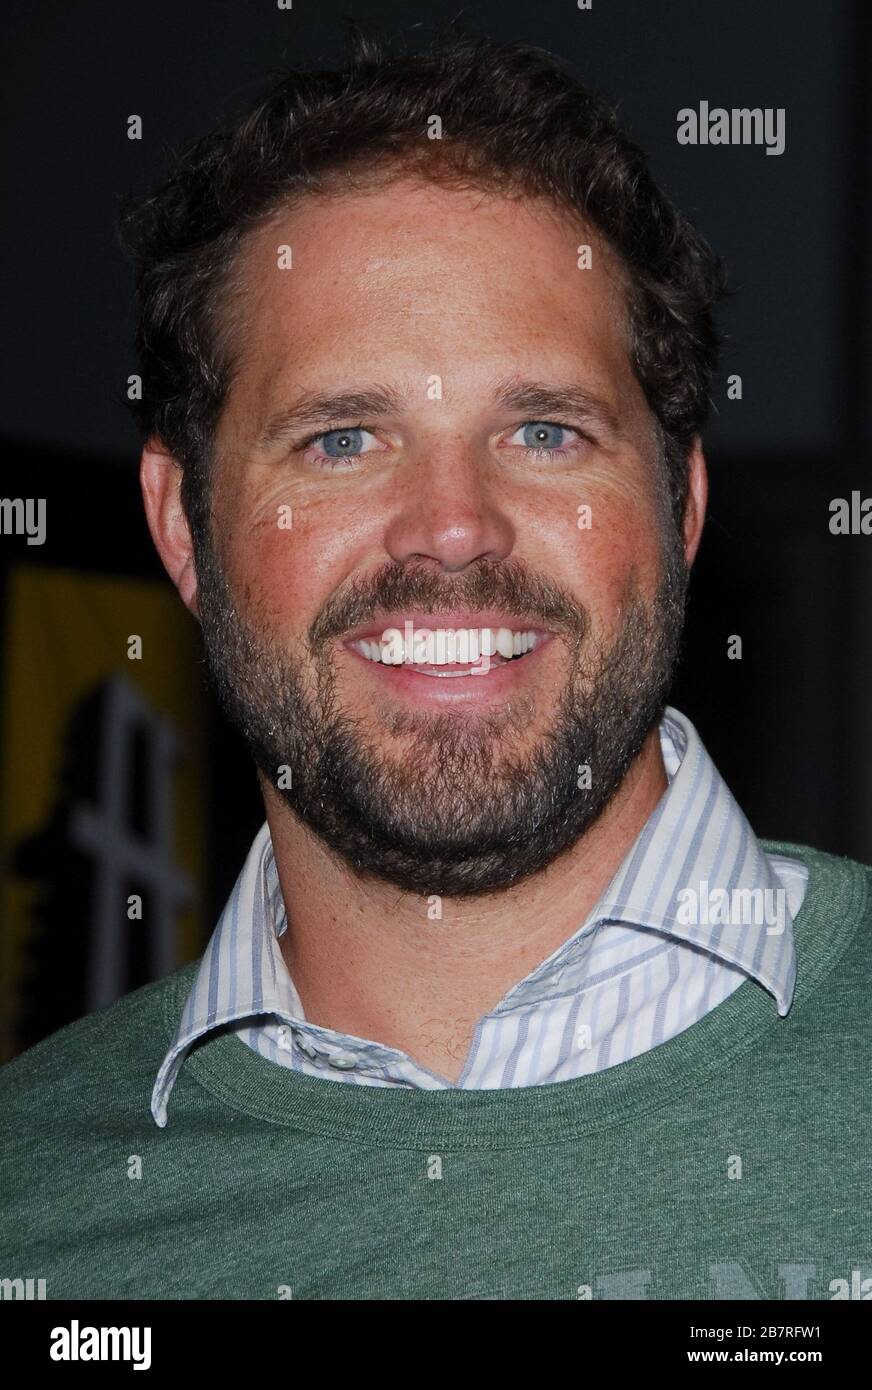 David Denman at the Los Angeles Premiere of 'Catch A Fire' held at the Arclight Cinemas in Hollywood, CA. The event took place on Wednesday, October 25, 2006.  Photo by: SBM / PictureLux - File Reference # 33984-7704SBMPLX Stock Photo